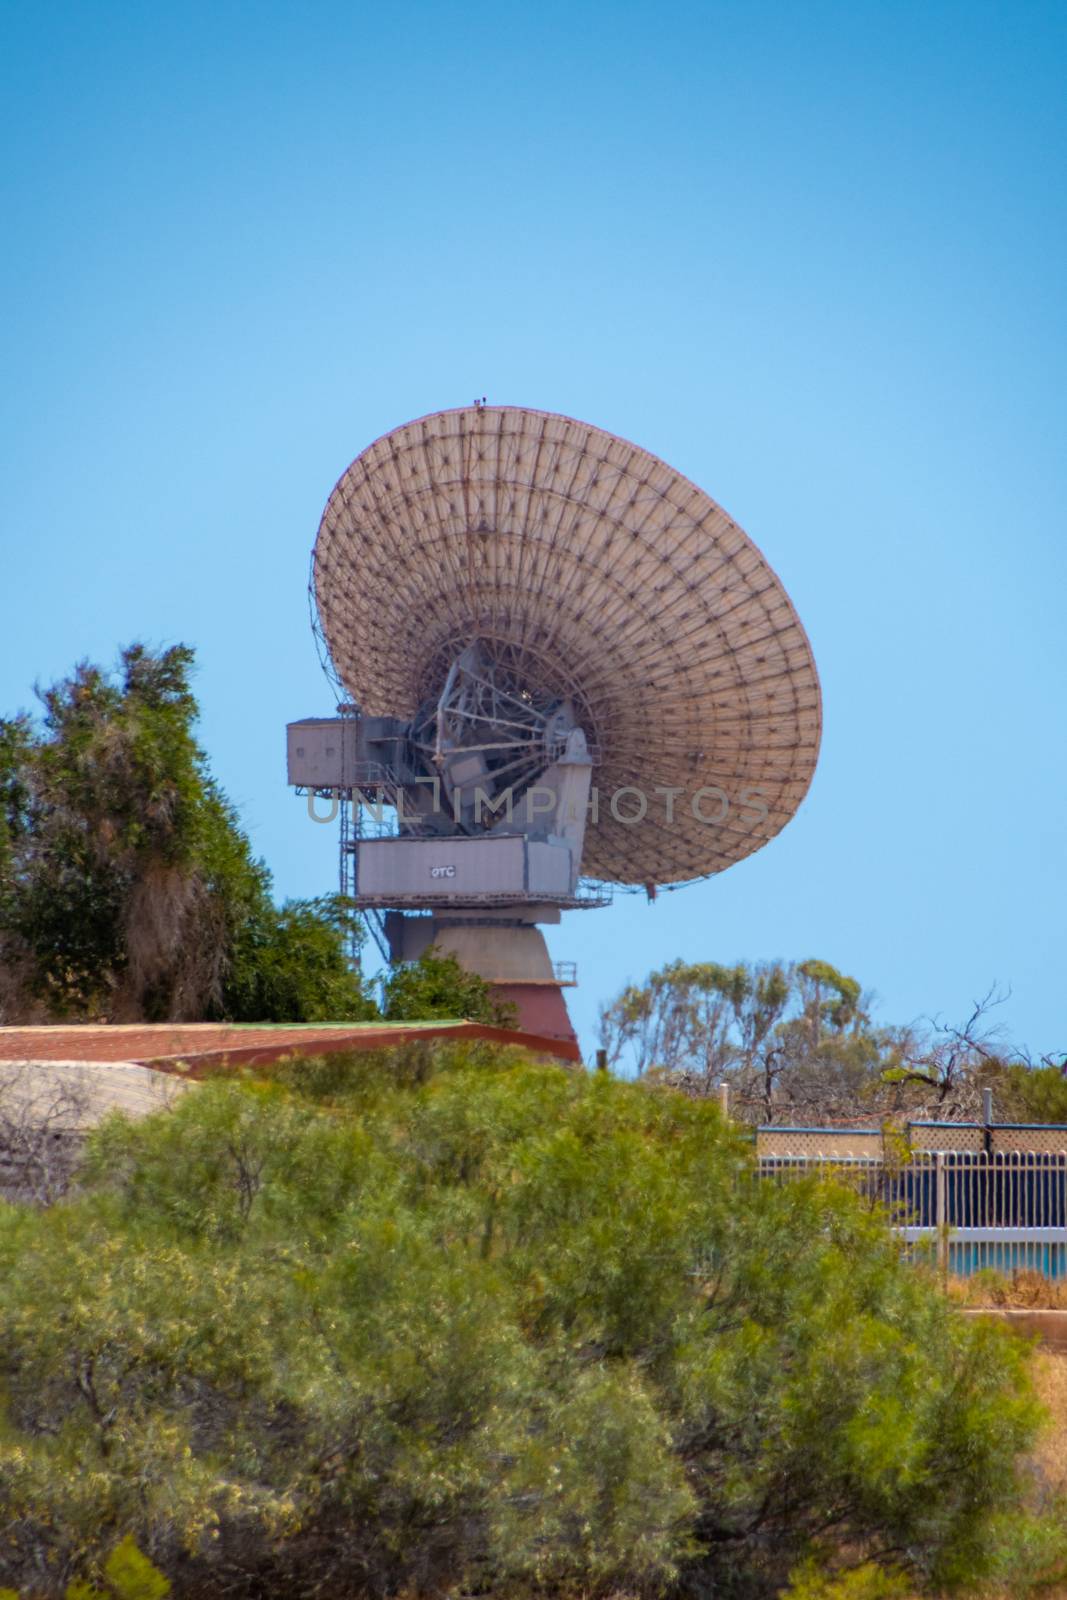 Historic satellite dish from the Apollo era at the Carnarvon Space and History Museum in Western Australia by MXW_Stock